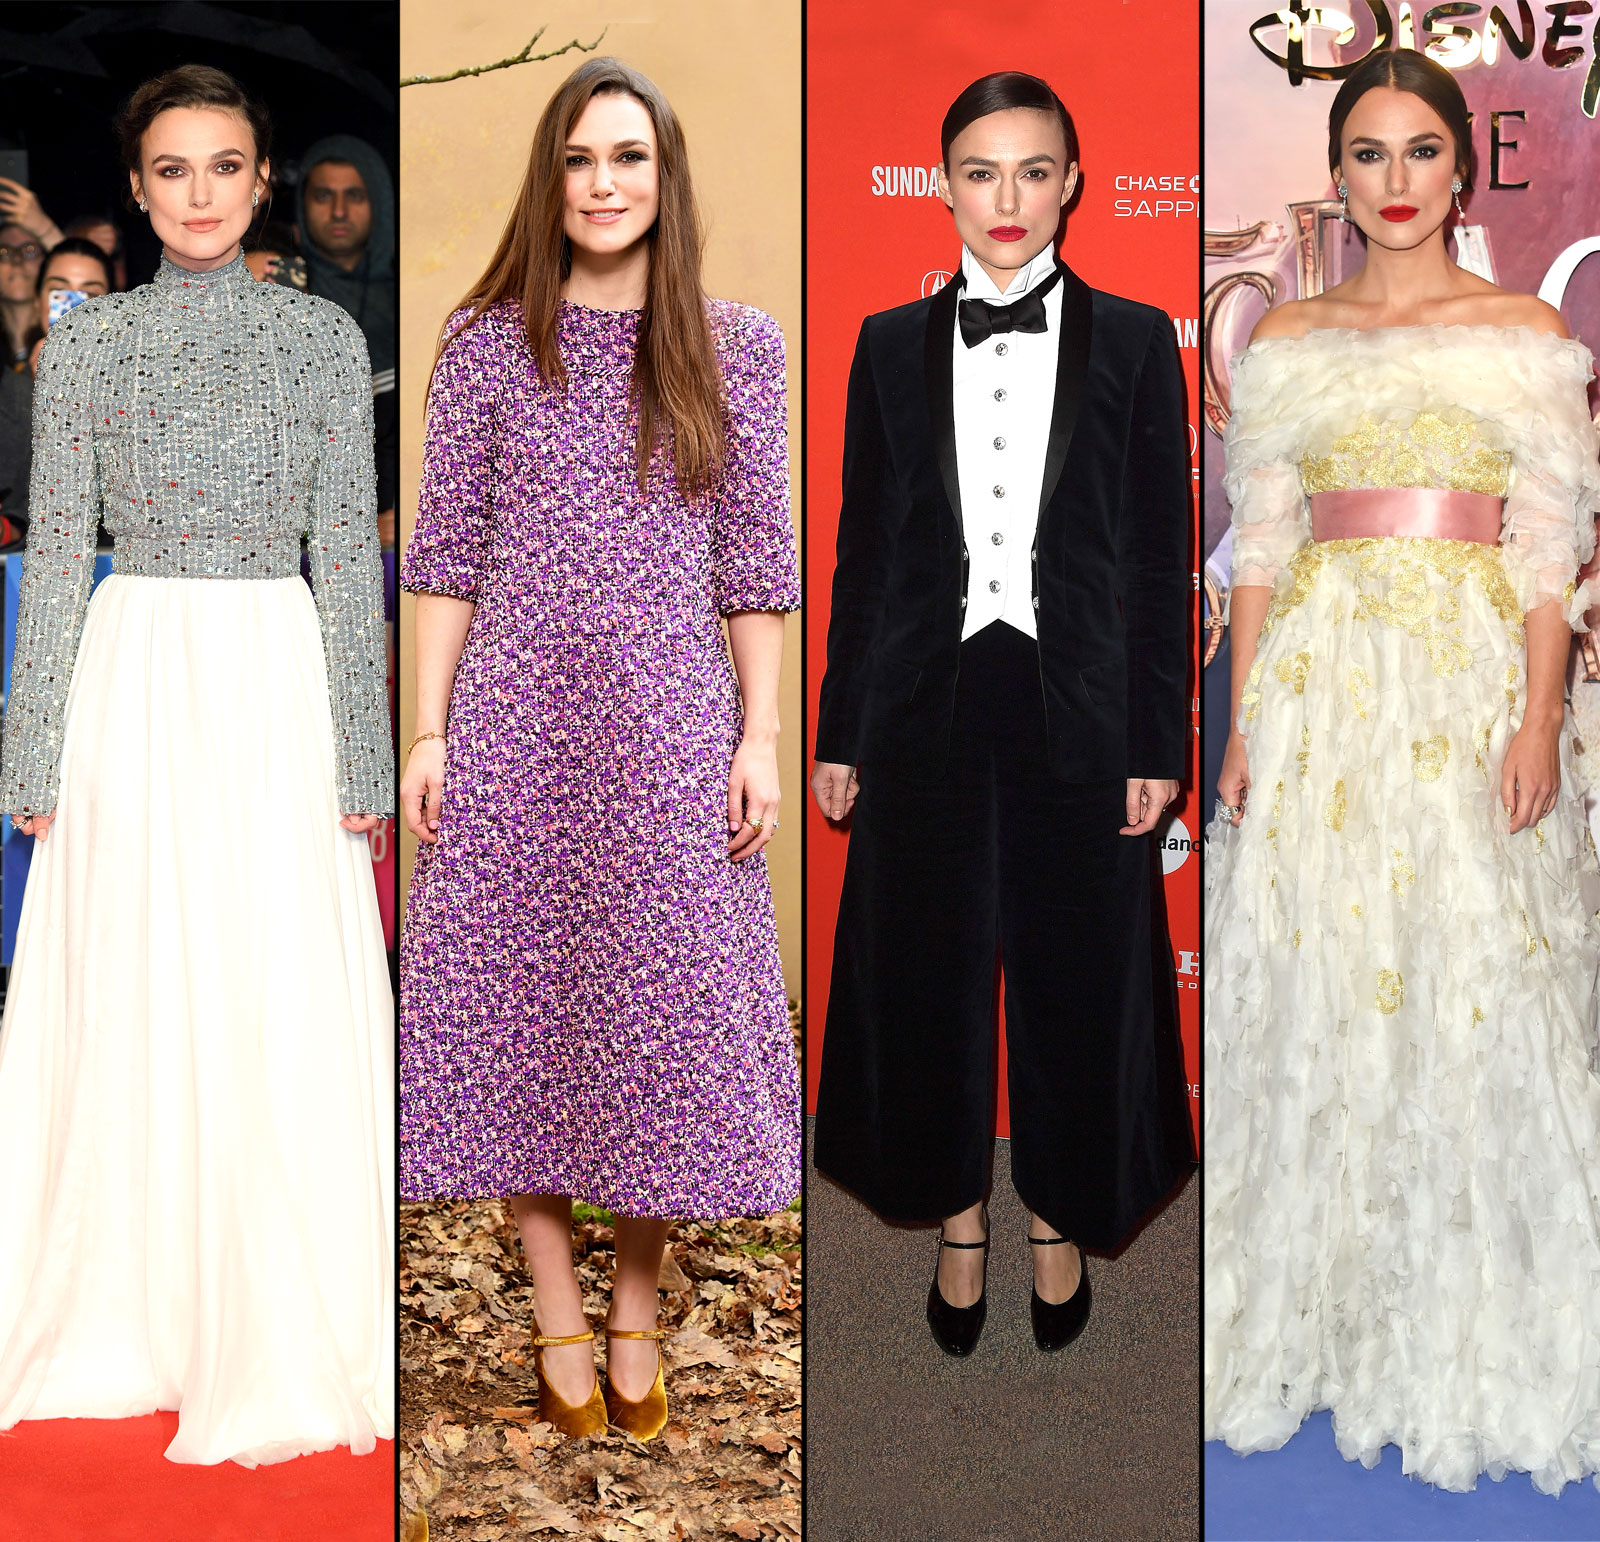 Keira Knightley Is A Knockout In Chanel See Her 10 Top Red Carpet Looks Us Weekly Keira Knightley Wearing Chanel On The Red Carpet Her Best Looks